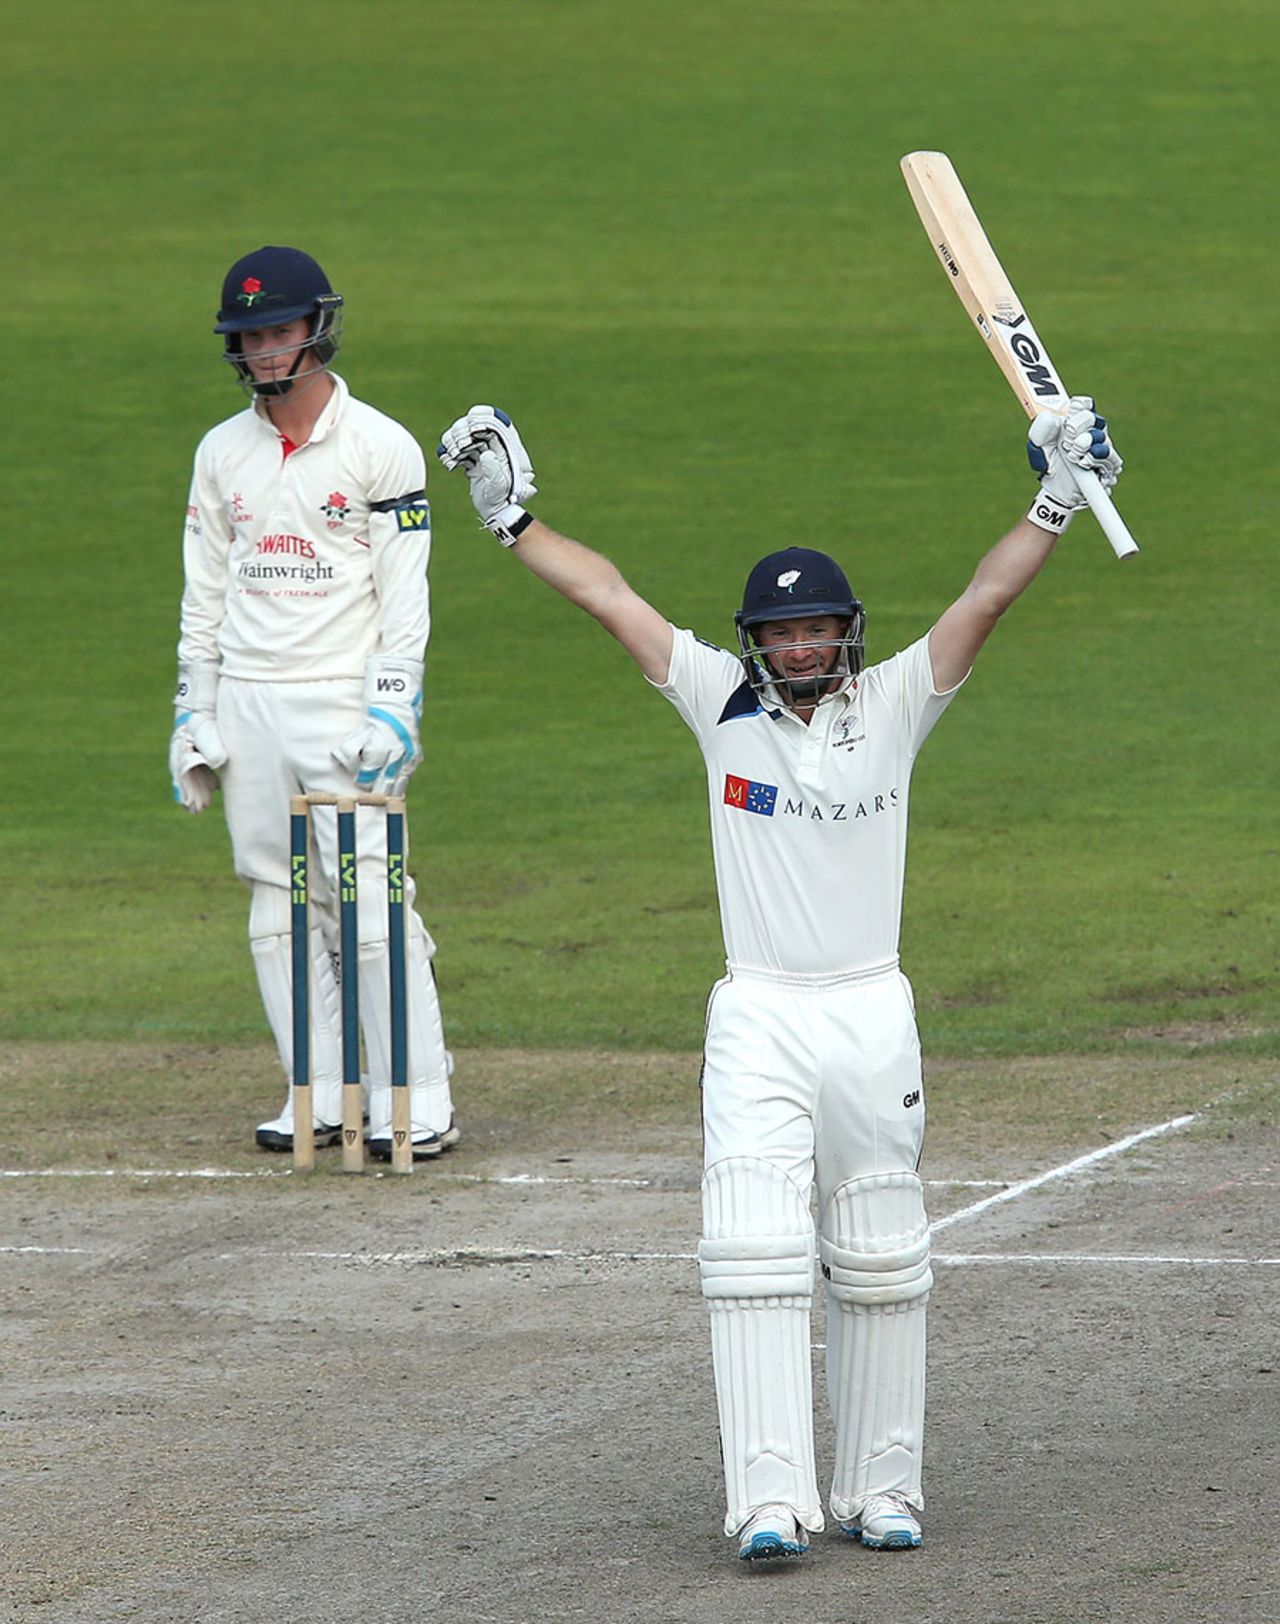 There was no stopping Adam Lyth has he raised a double century, Lancashire v Yorkshire, County Championship Division One, Old Trafford, 3rd day, September 2, 2014